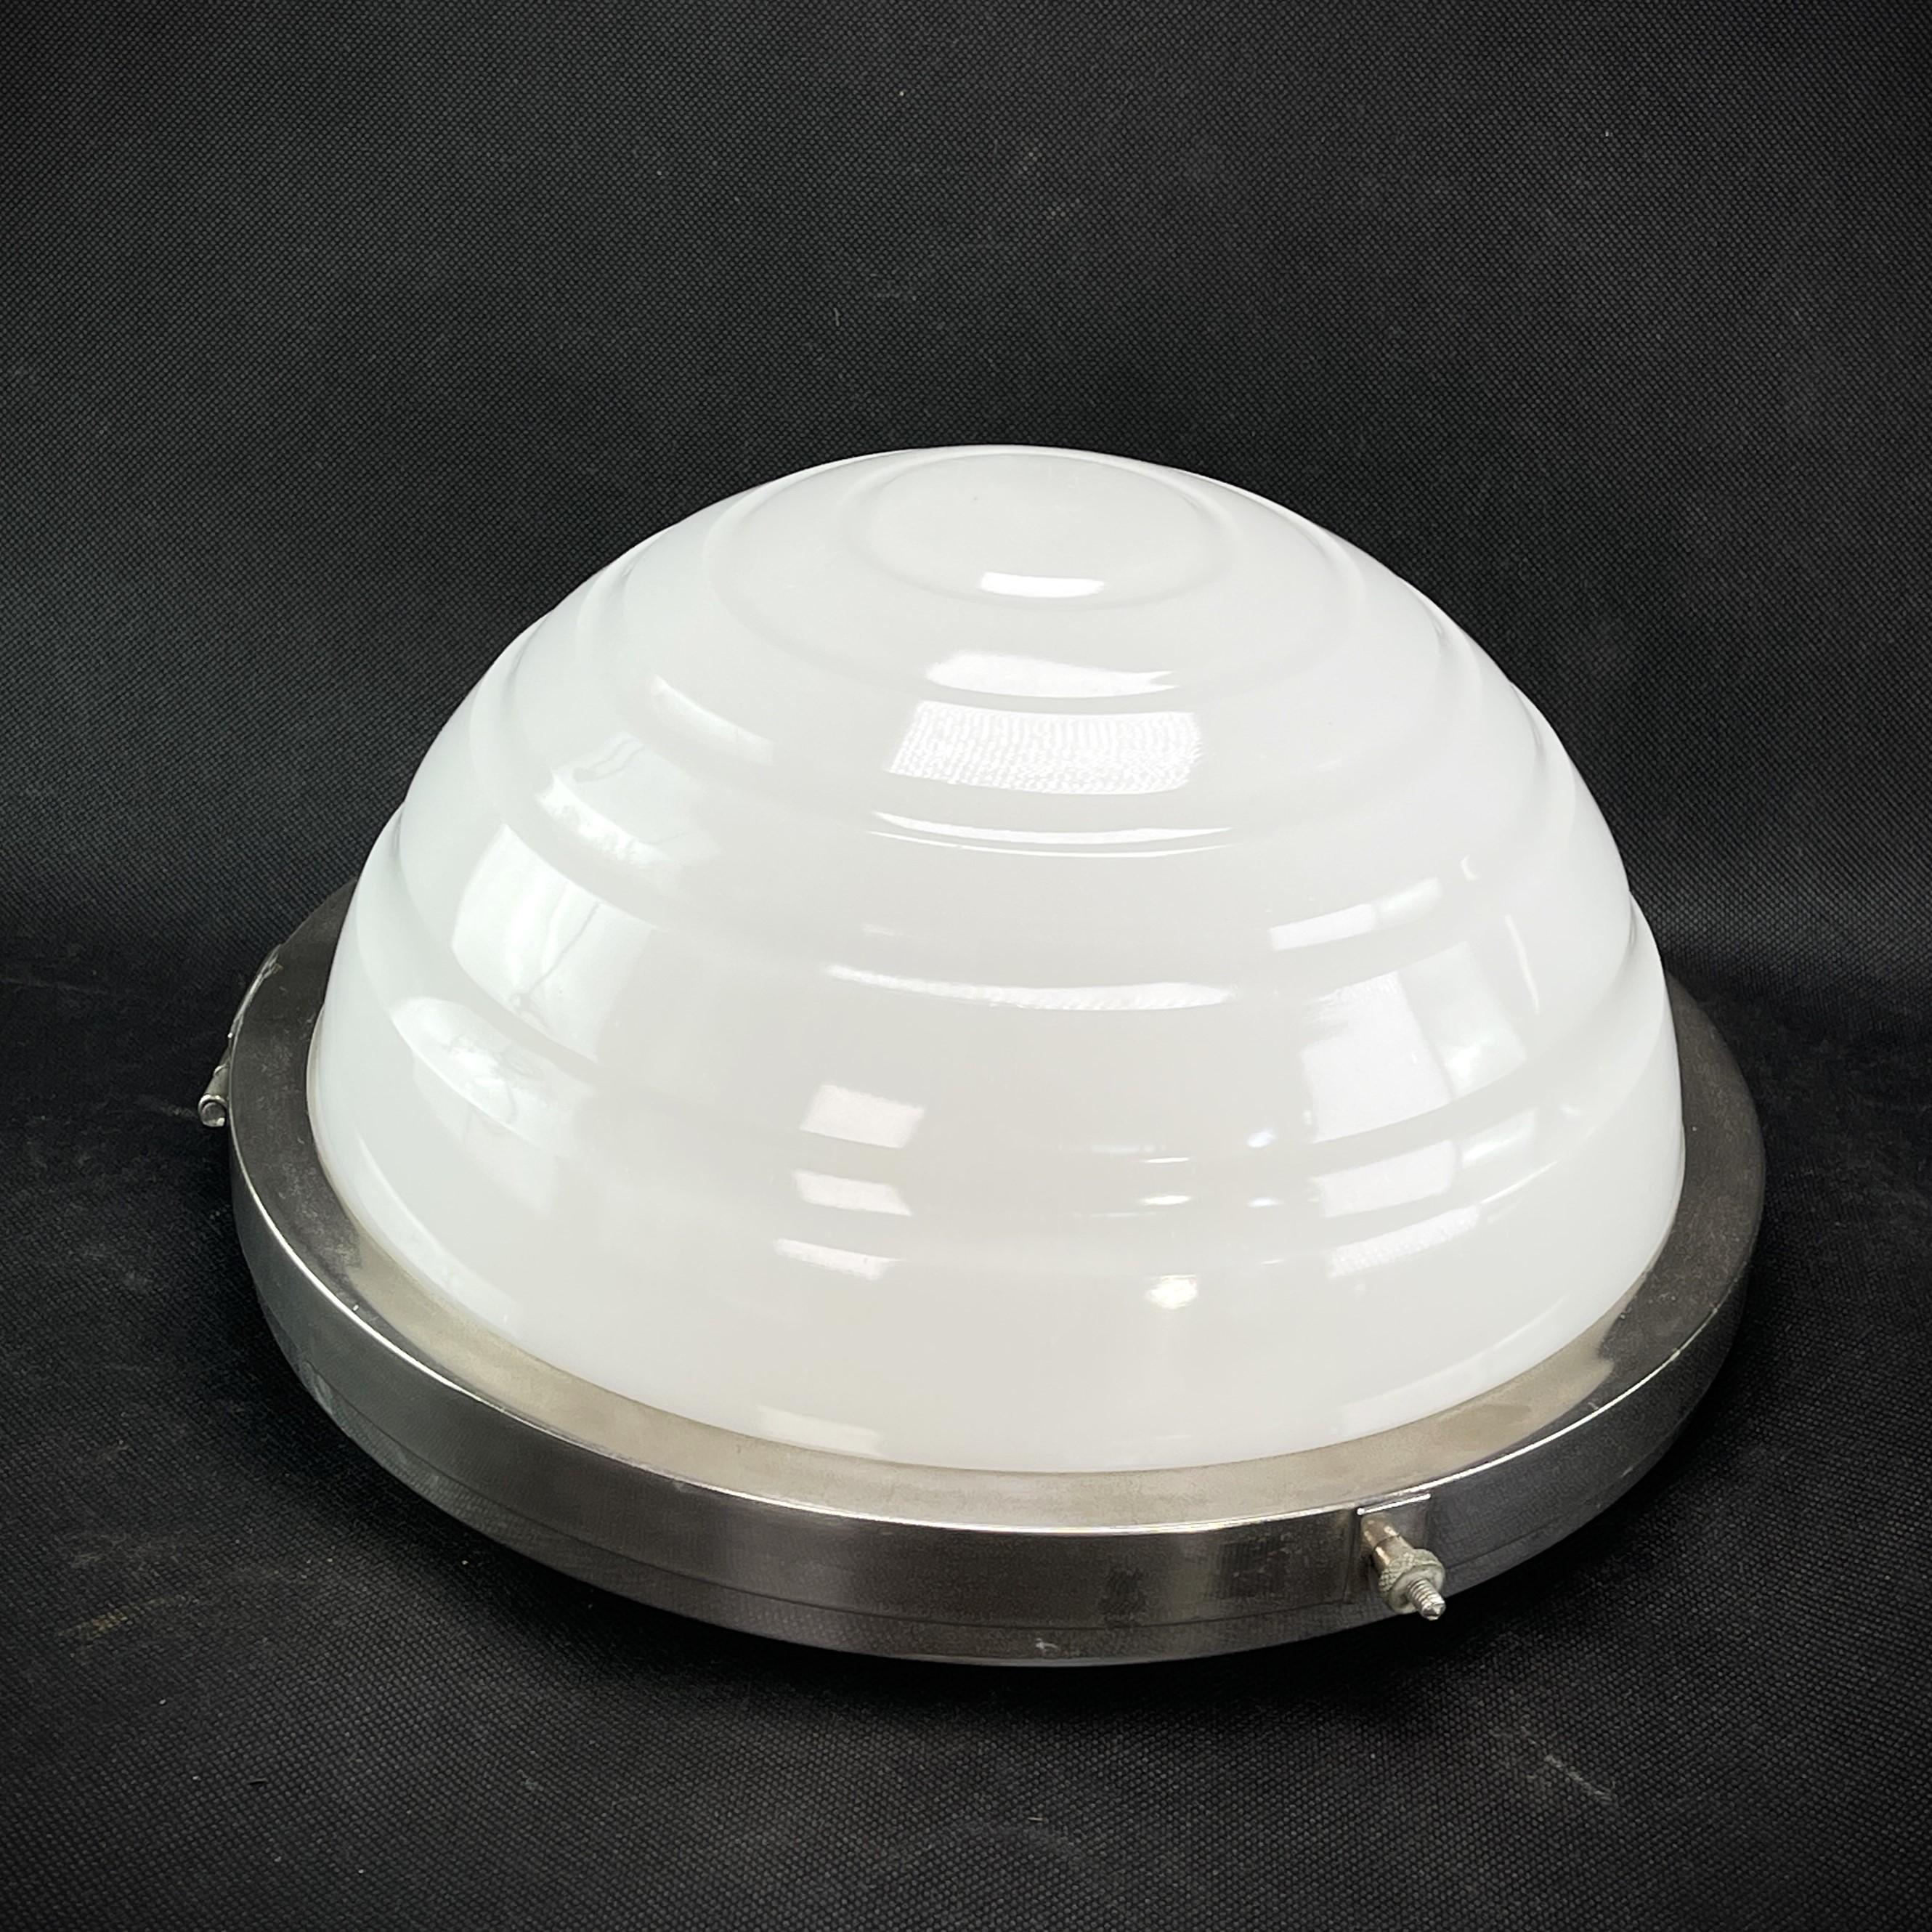 Art Deco ceiling or wall light -1930s

This rare, original ceiling lamp captivates with its simple and matter-of-fact Art Deco design. The lamp gives a very pleasant light. This ceiling lamp is an absolute design classic from the ART DECOS